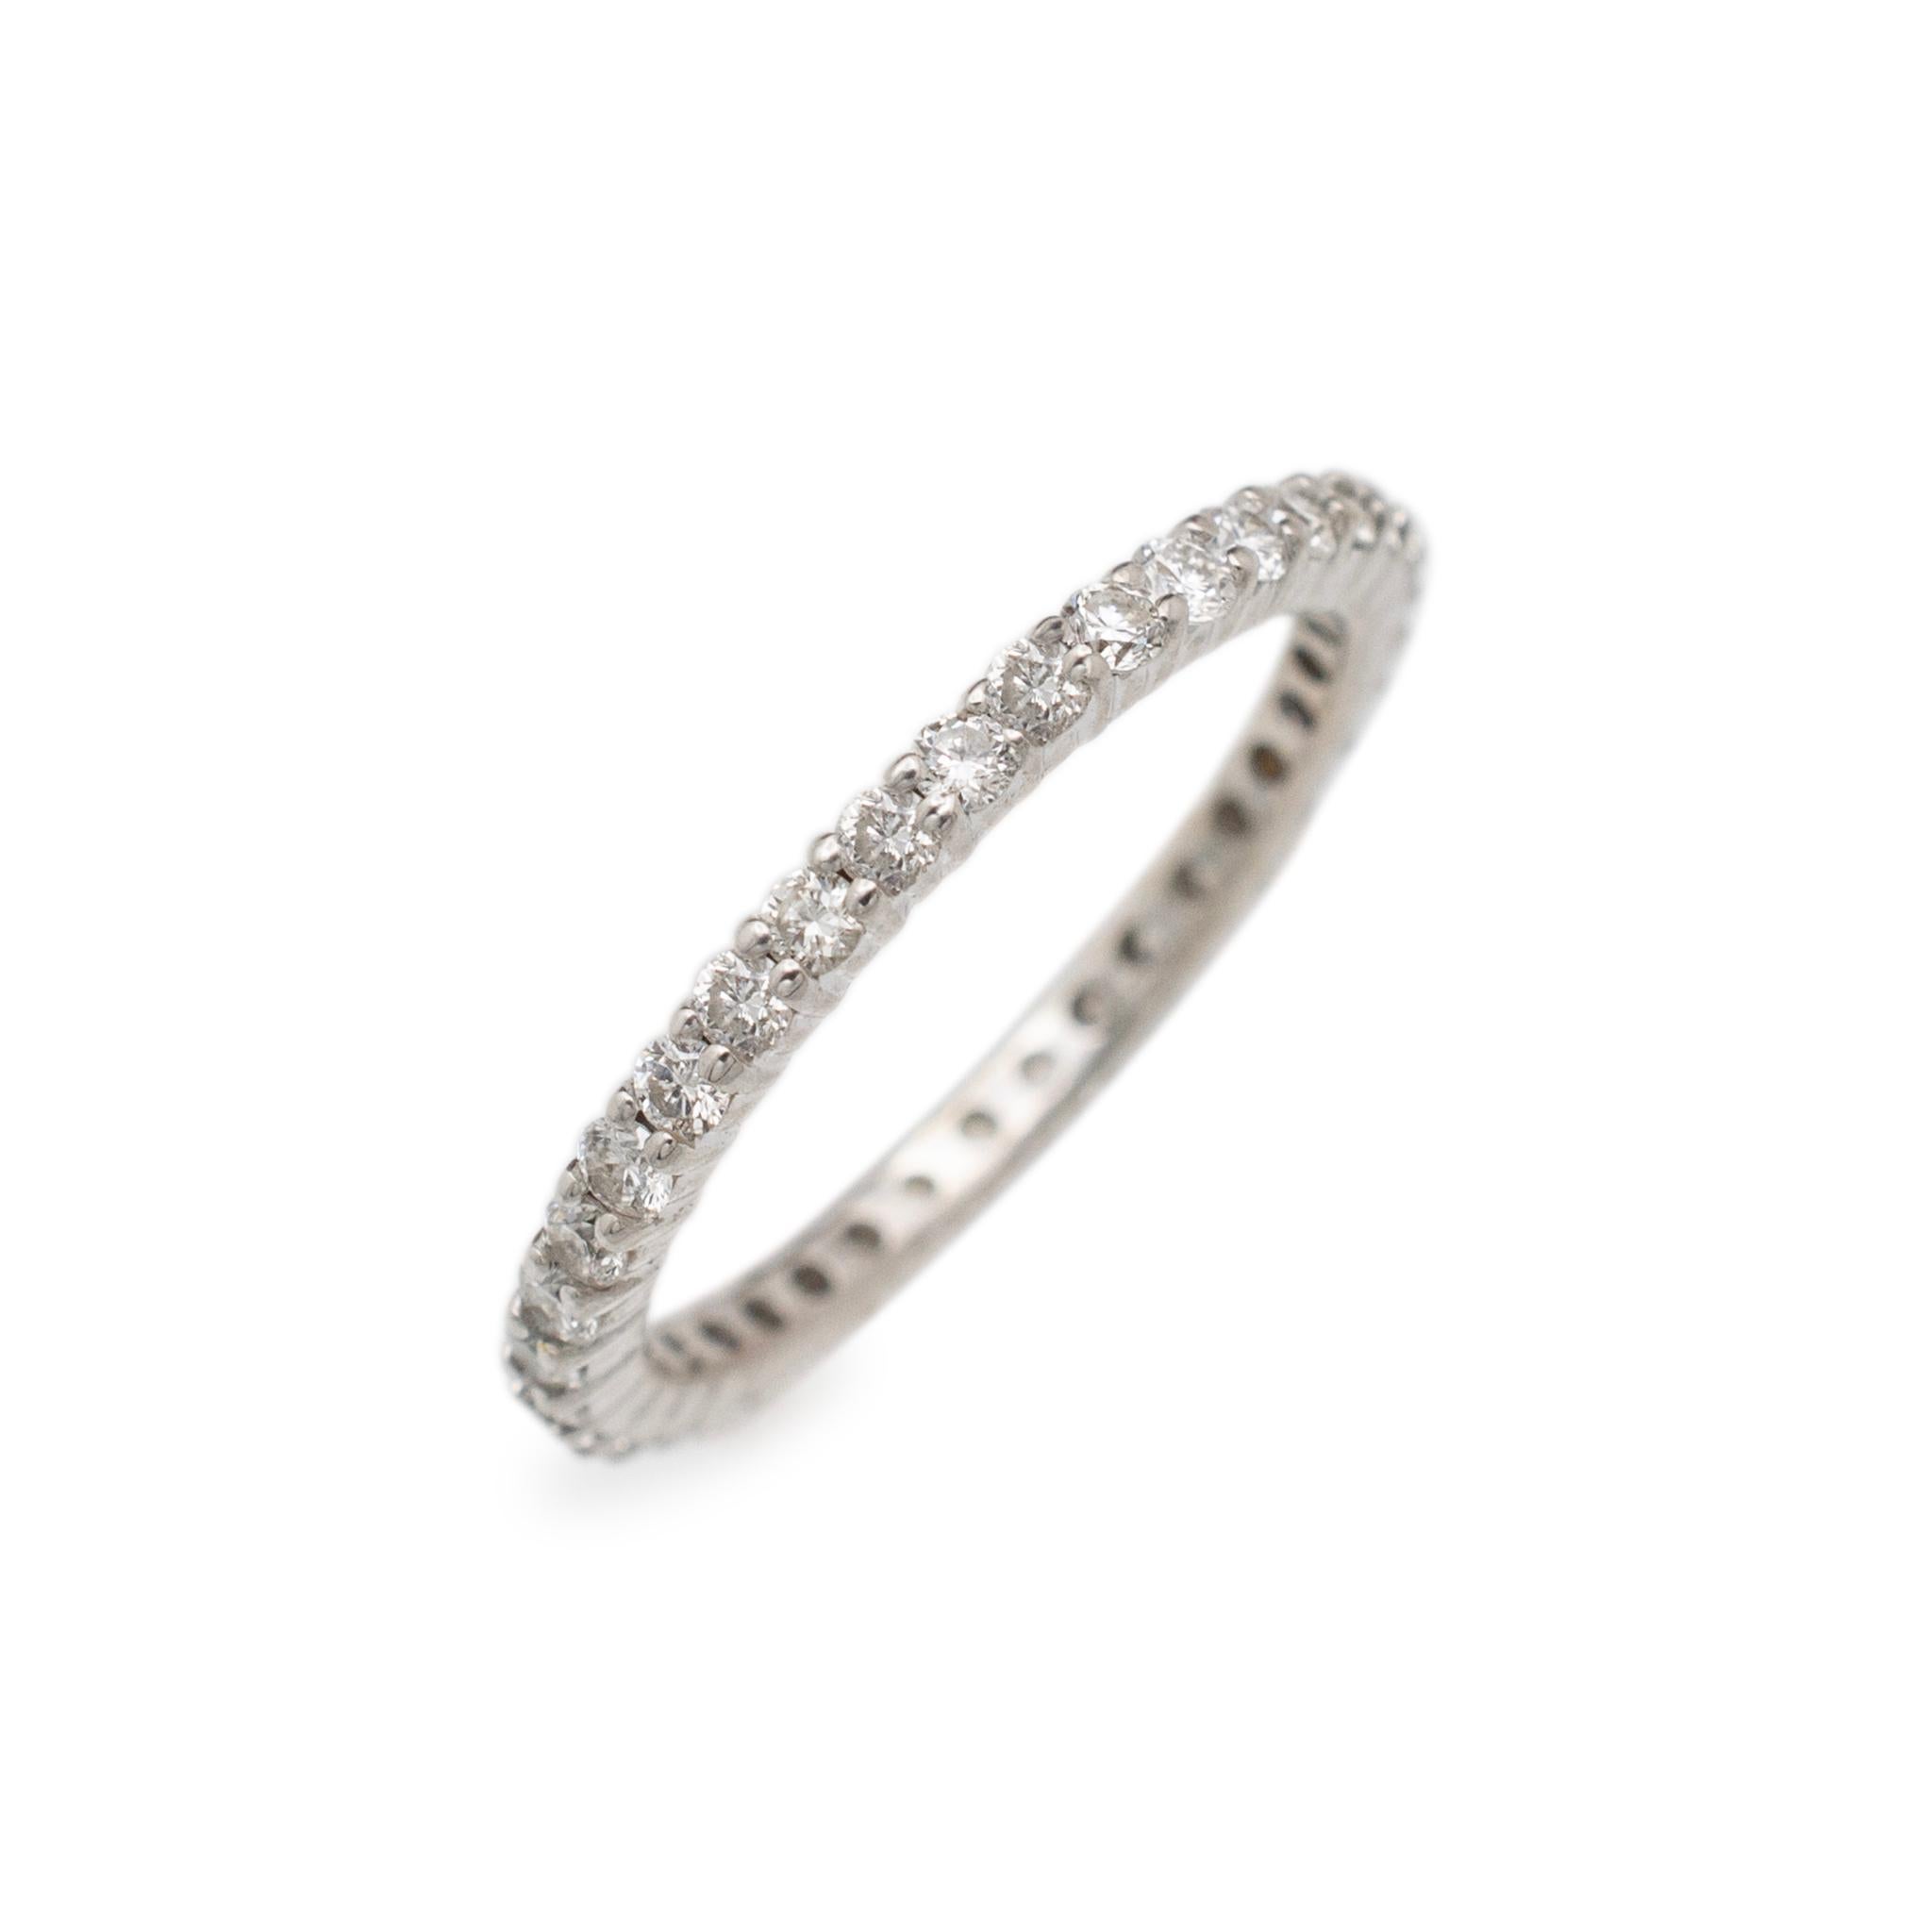 Gender: Ladies

Metal Type: 14K White Gold

Size: 5.5

Shank Maximum Width: 1.75 mm

Weight: 1.31 grams

Ladies 14K white gold diamond wedding eternity band with a half-round shank. The metal was tested and determined to be 14K white gold. Engraved